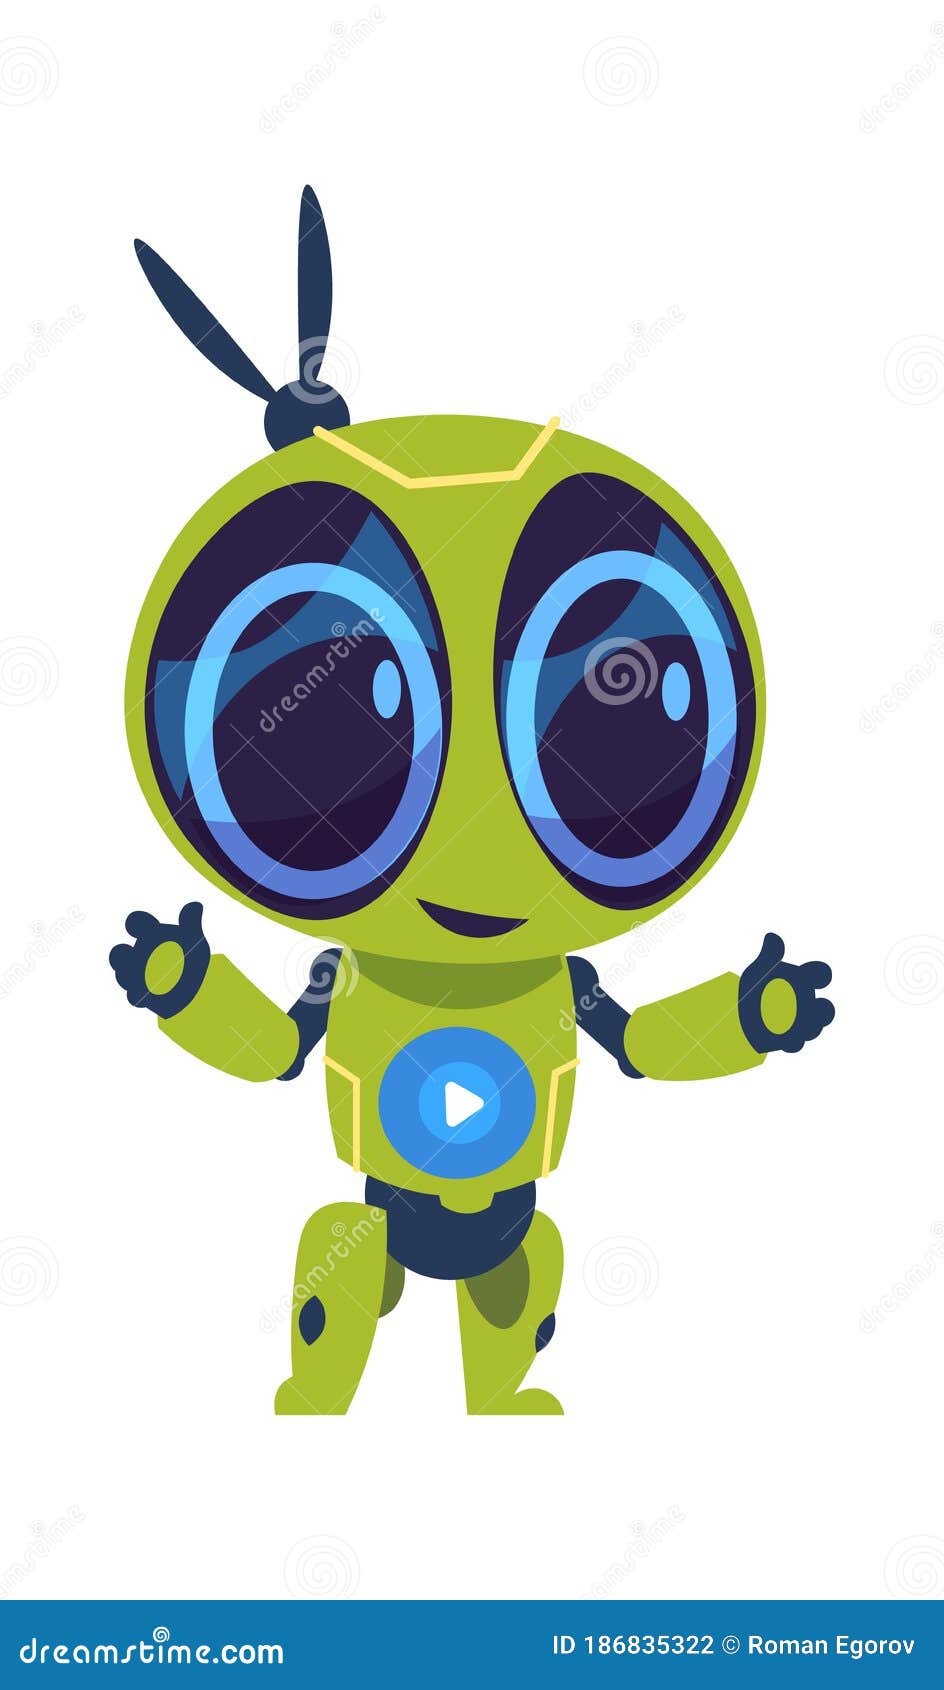 Friendly Robot. Futuristic Droid with Friendly Eyes. Cartoon Vector Image  Humanoid Character Stock Vector - Illustration of cartoon, blue: 186835322